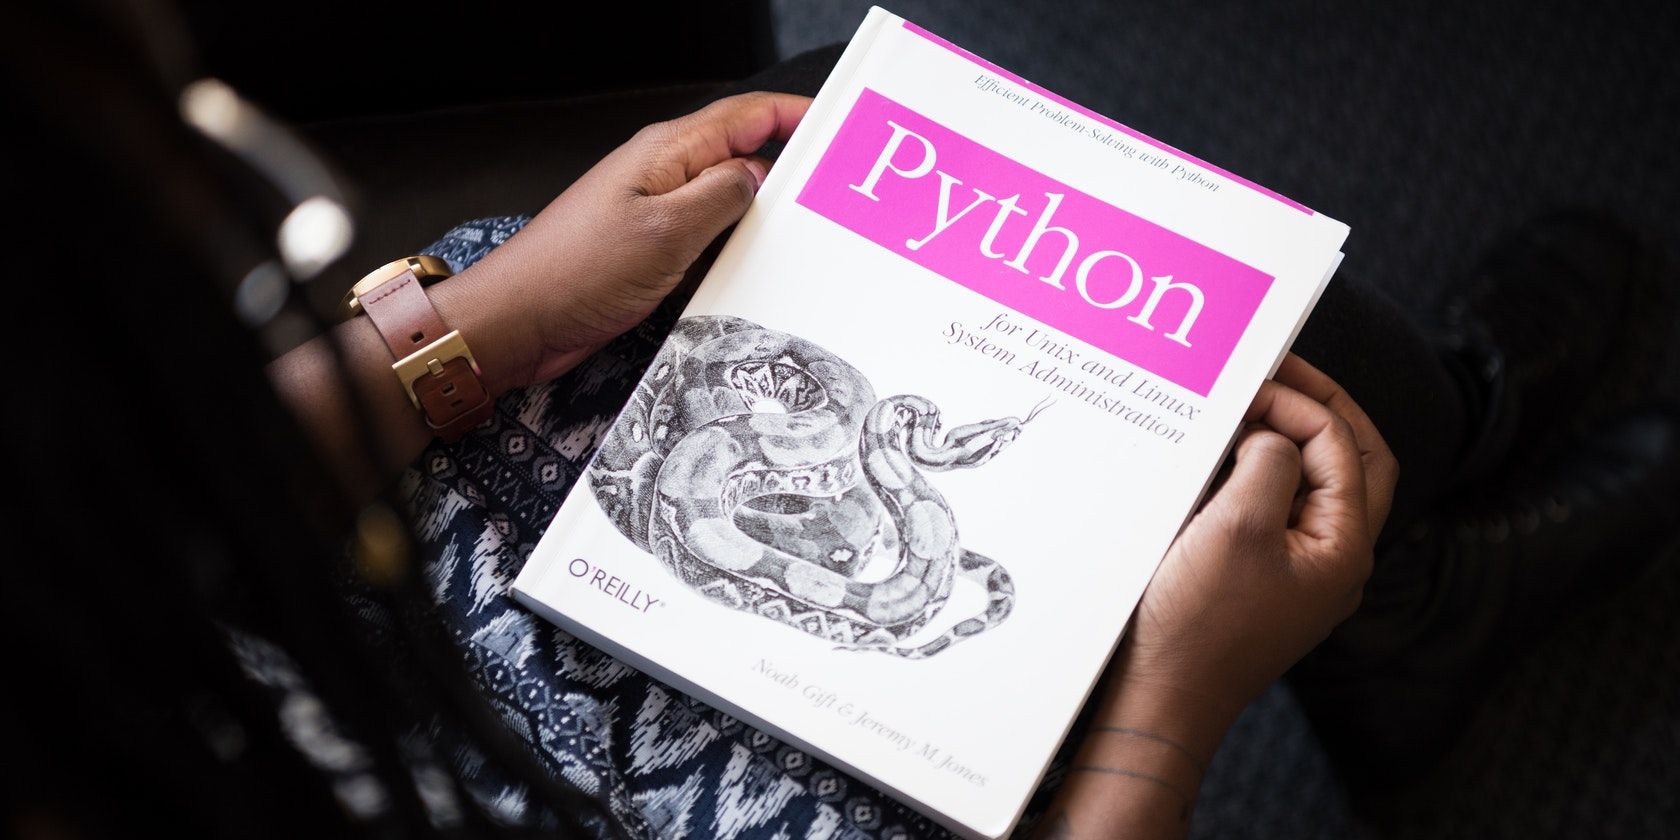 An O'Reilly Python book, featuring a large snake on the cover, held in somebody's hands 